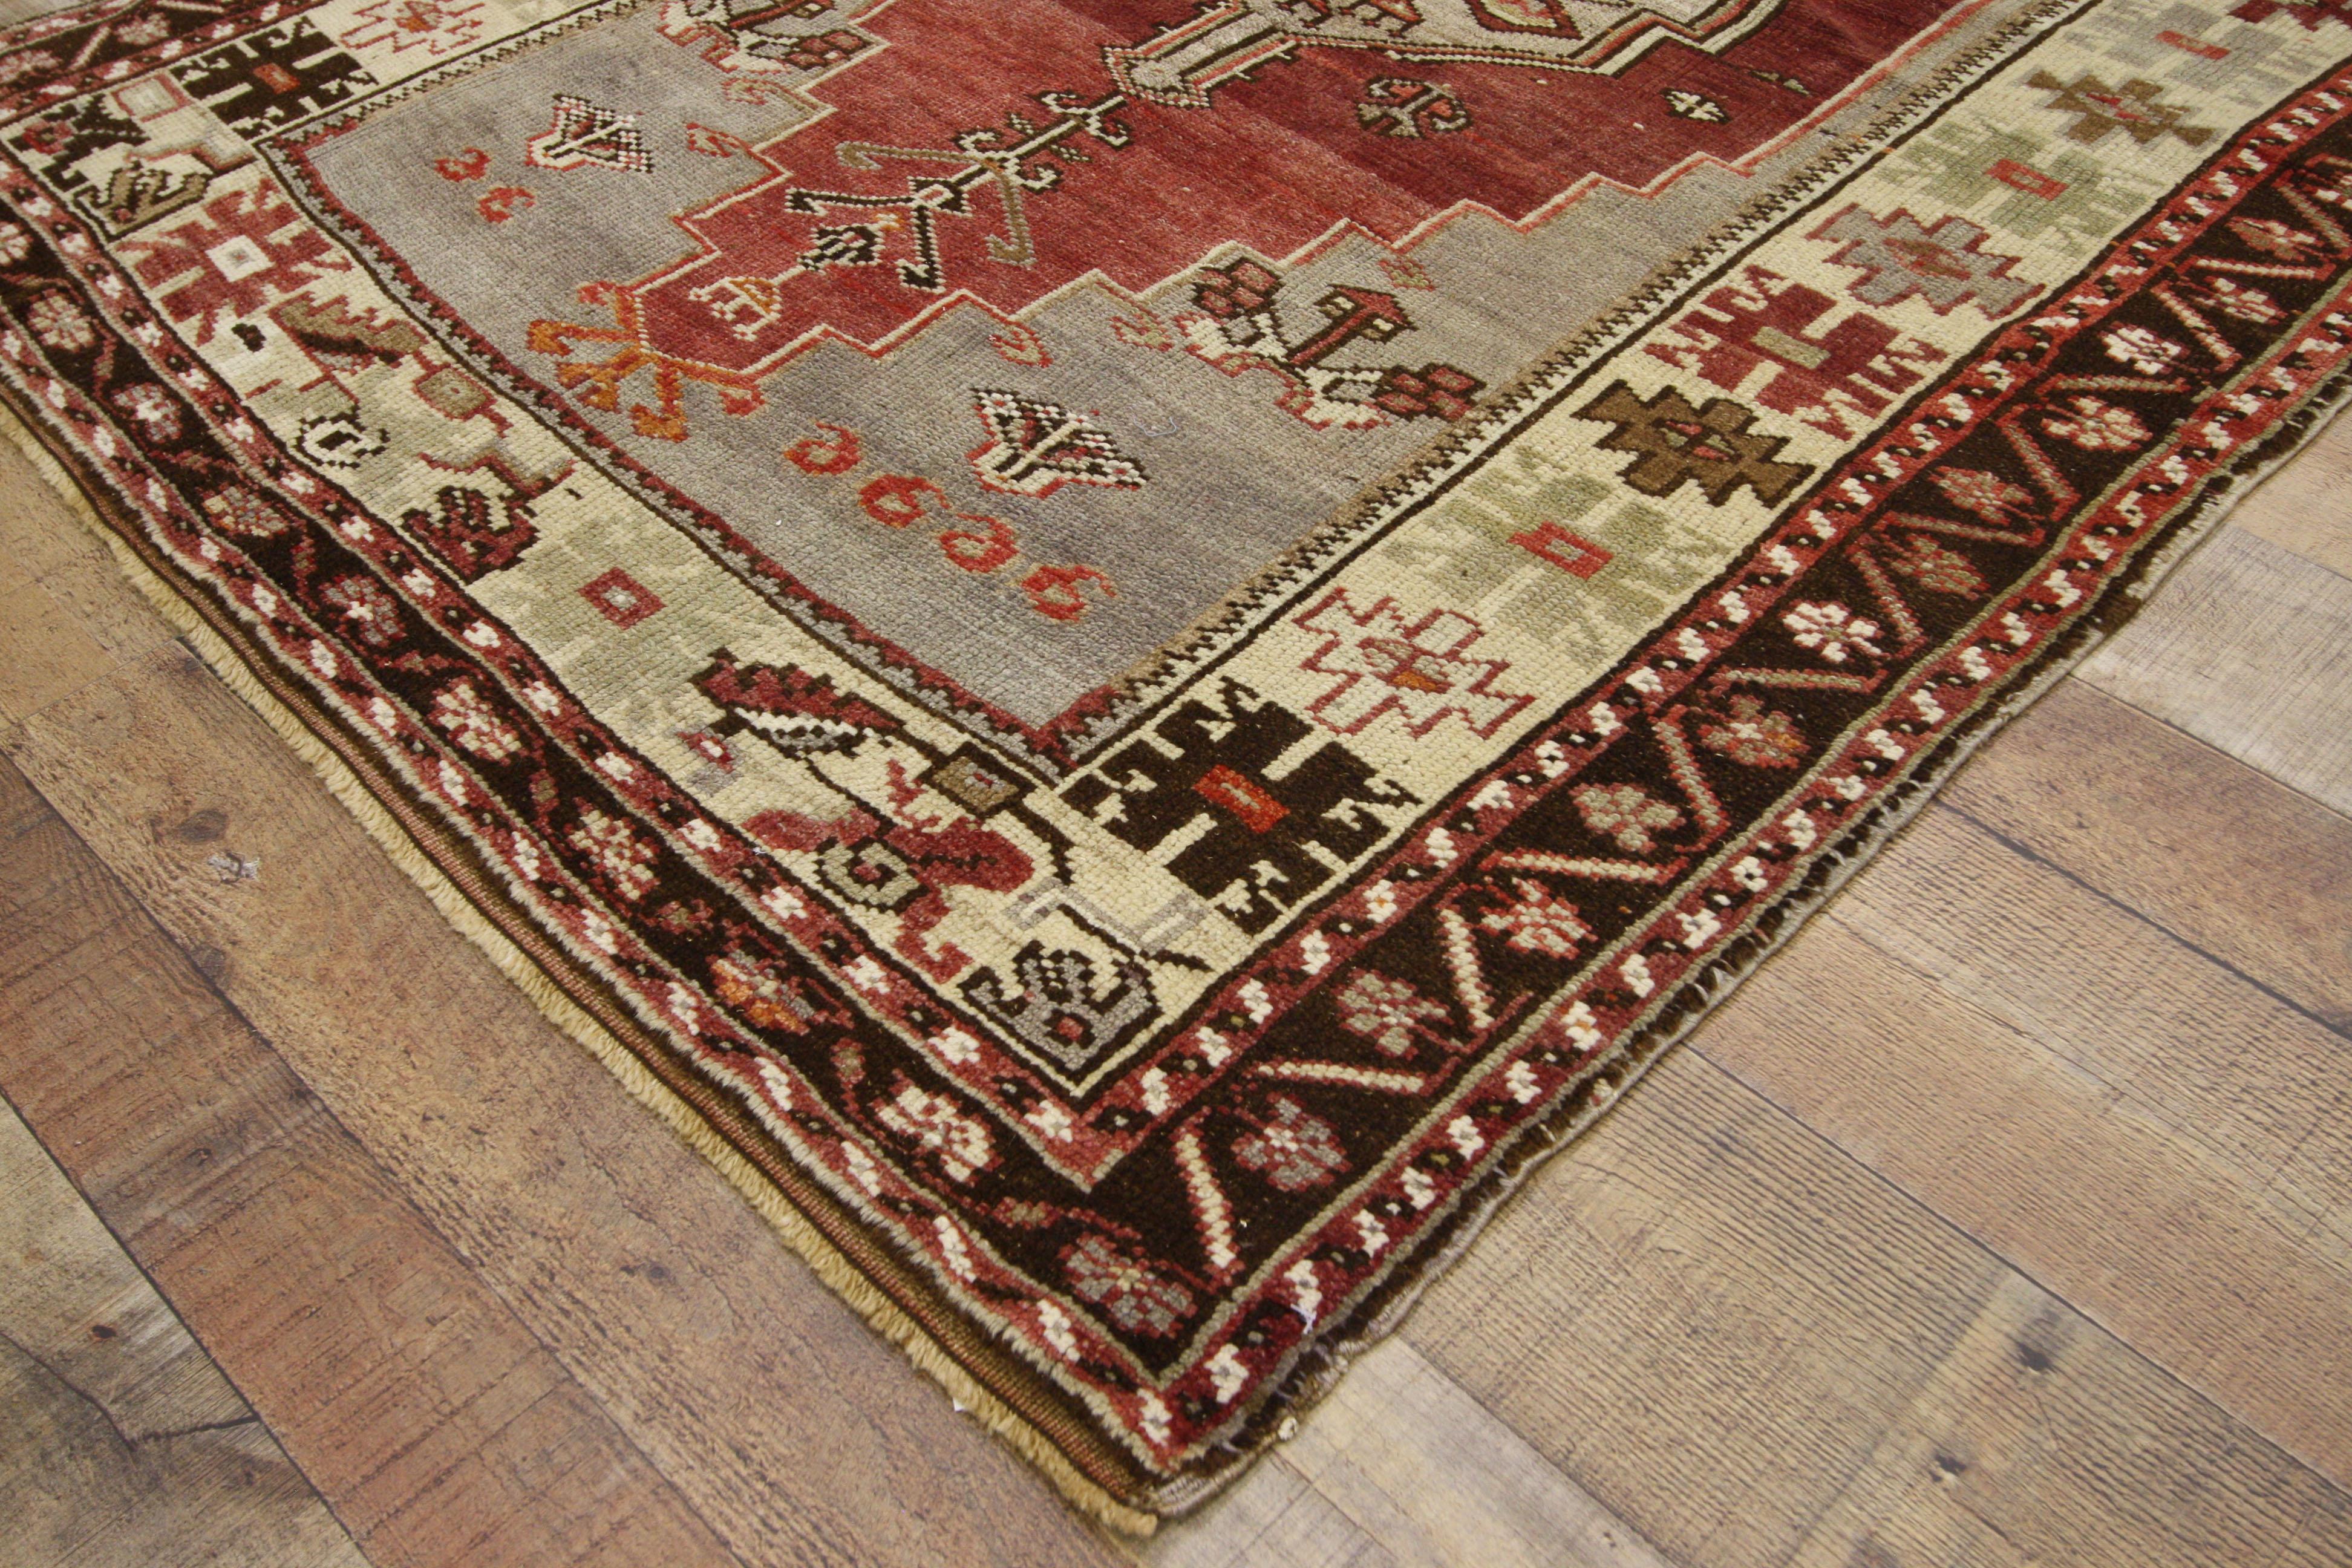 52384, vintage Oushak rug with Venetian style. Venetian style is a stunning amalgam of Islamic and Italian furnishings and design elements. In this hand knotted wool vintage Turkish Oushak rug we see both cultures on display. Sumptuous like Italian